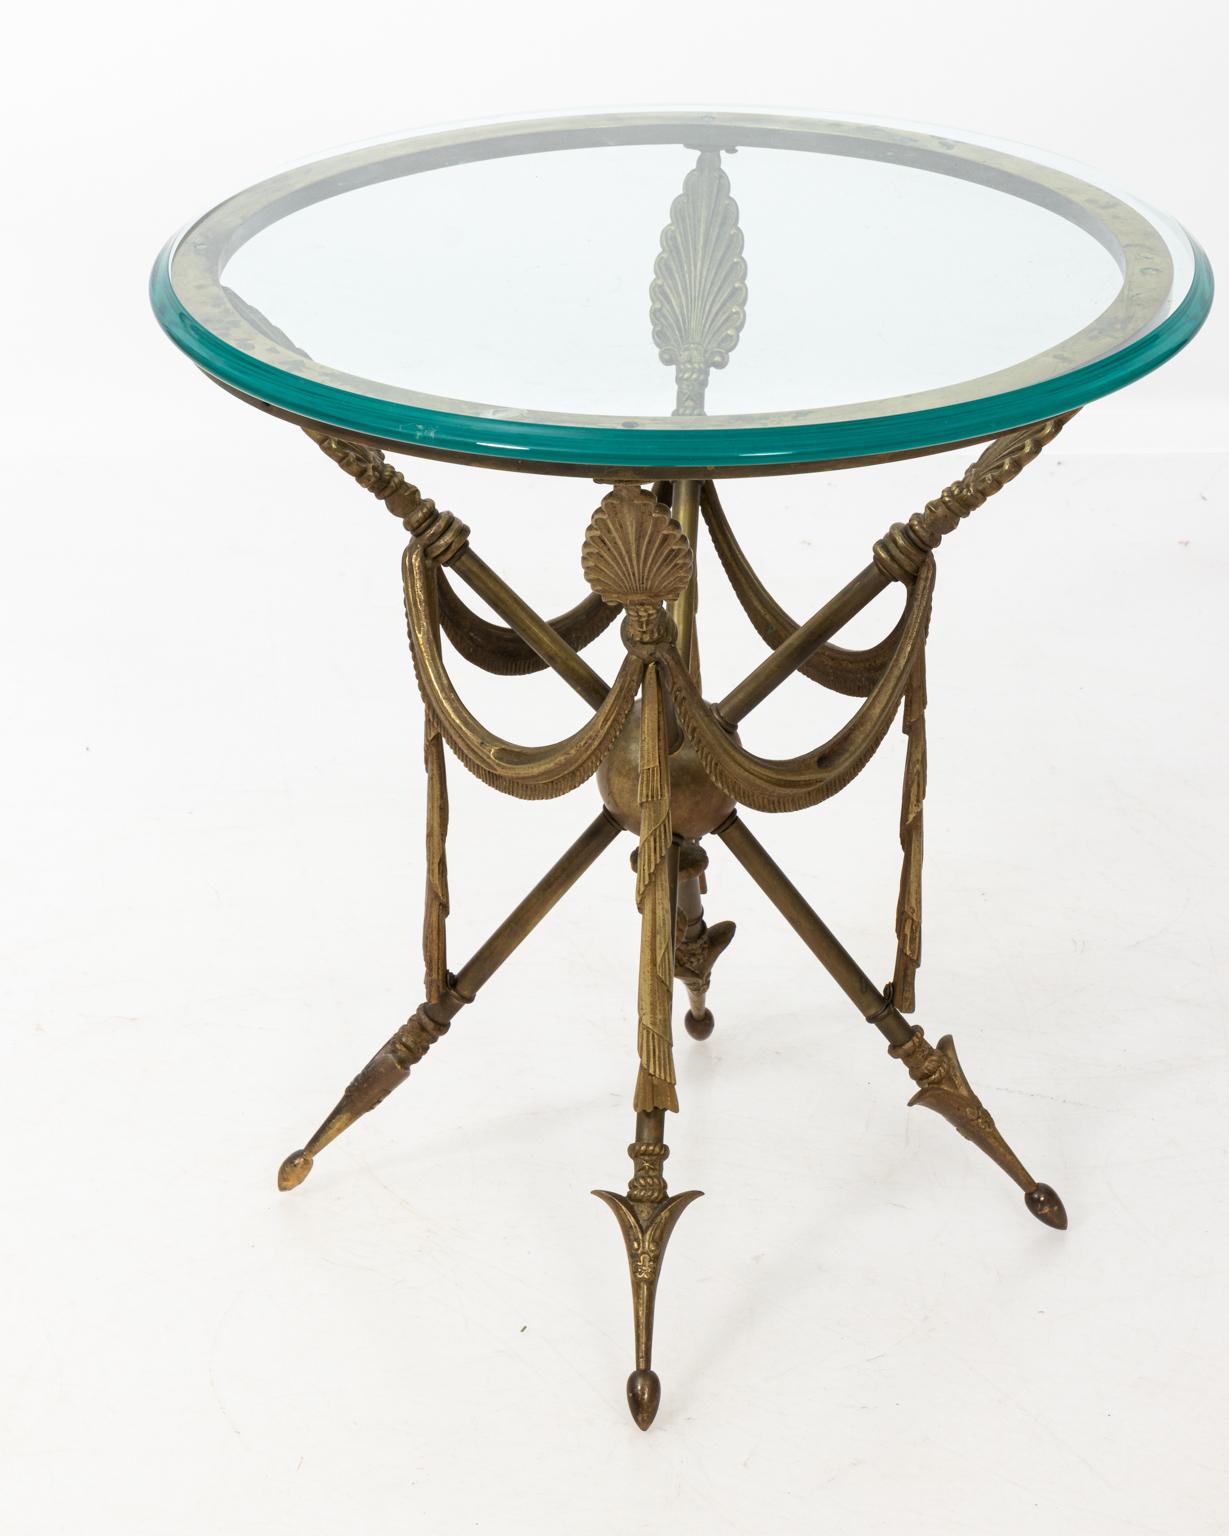 Bronze size table with glass top and arrow base. Please note of wear consistent with age including patina and minor oxidation.